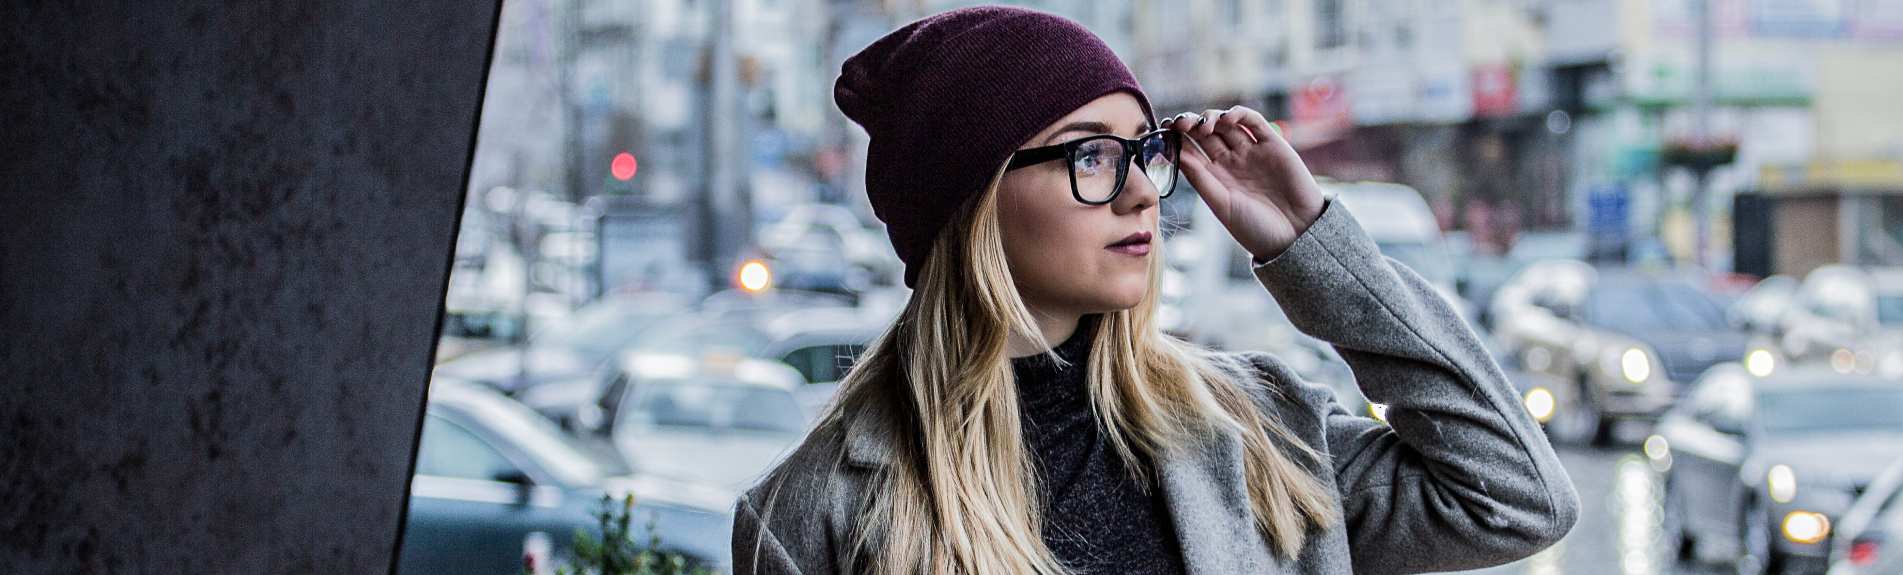 5 reasons you need a backup pair of glasses